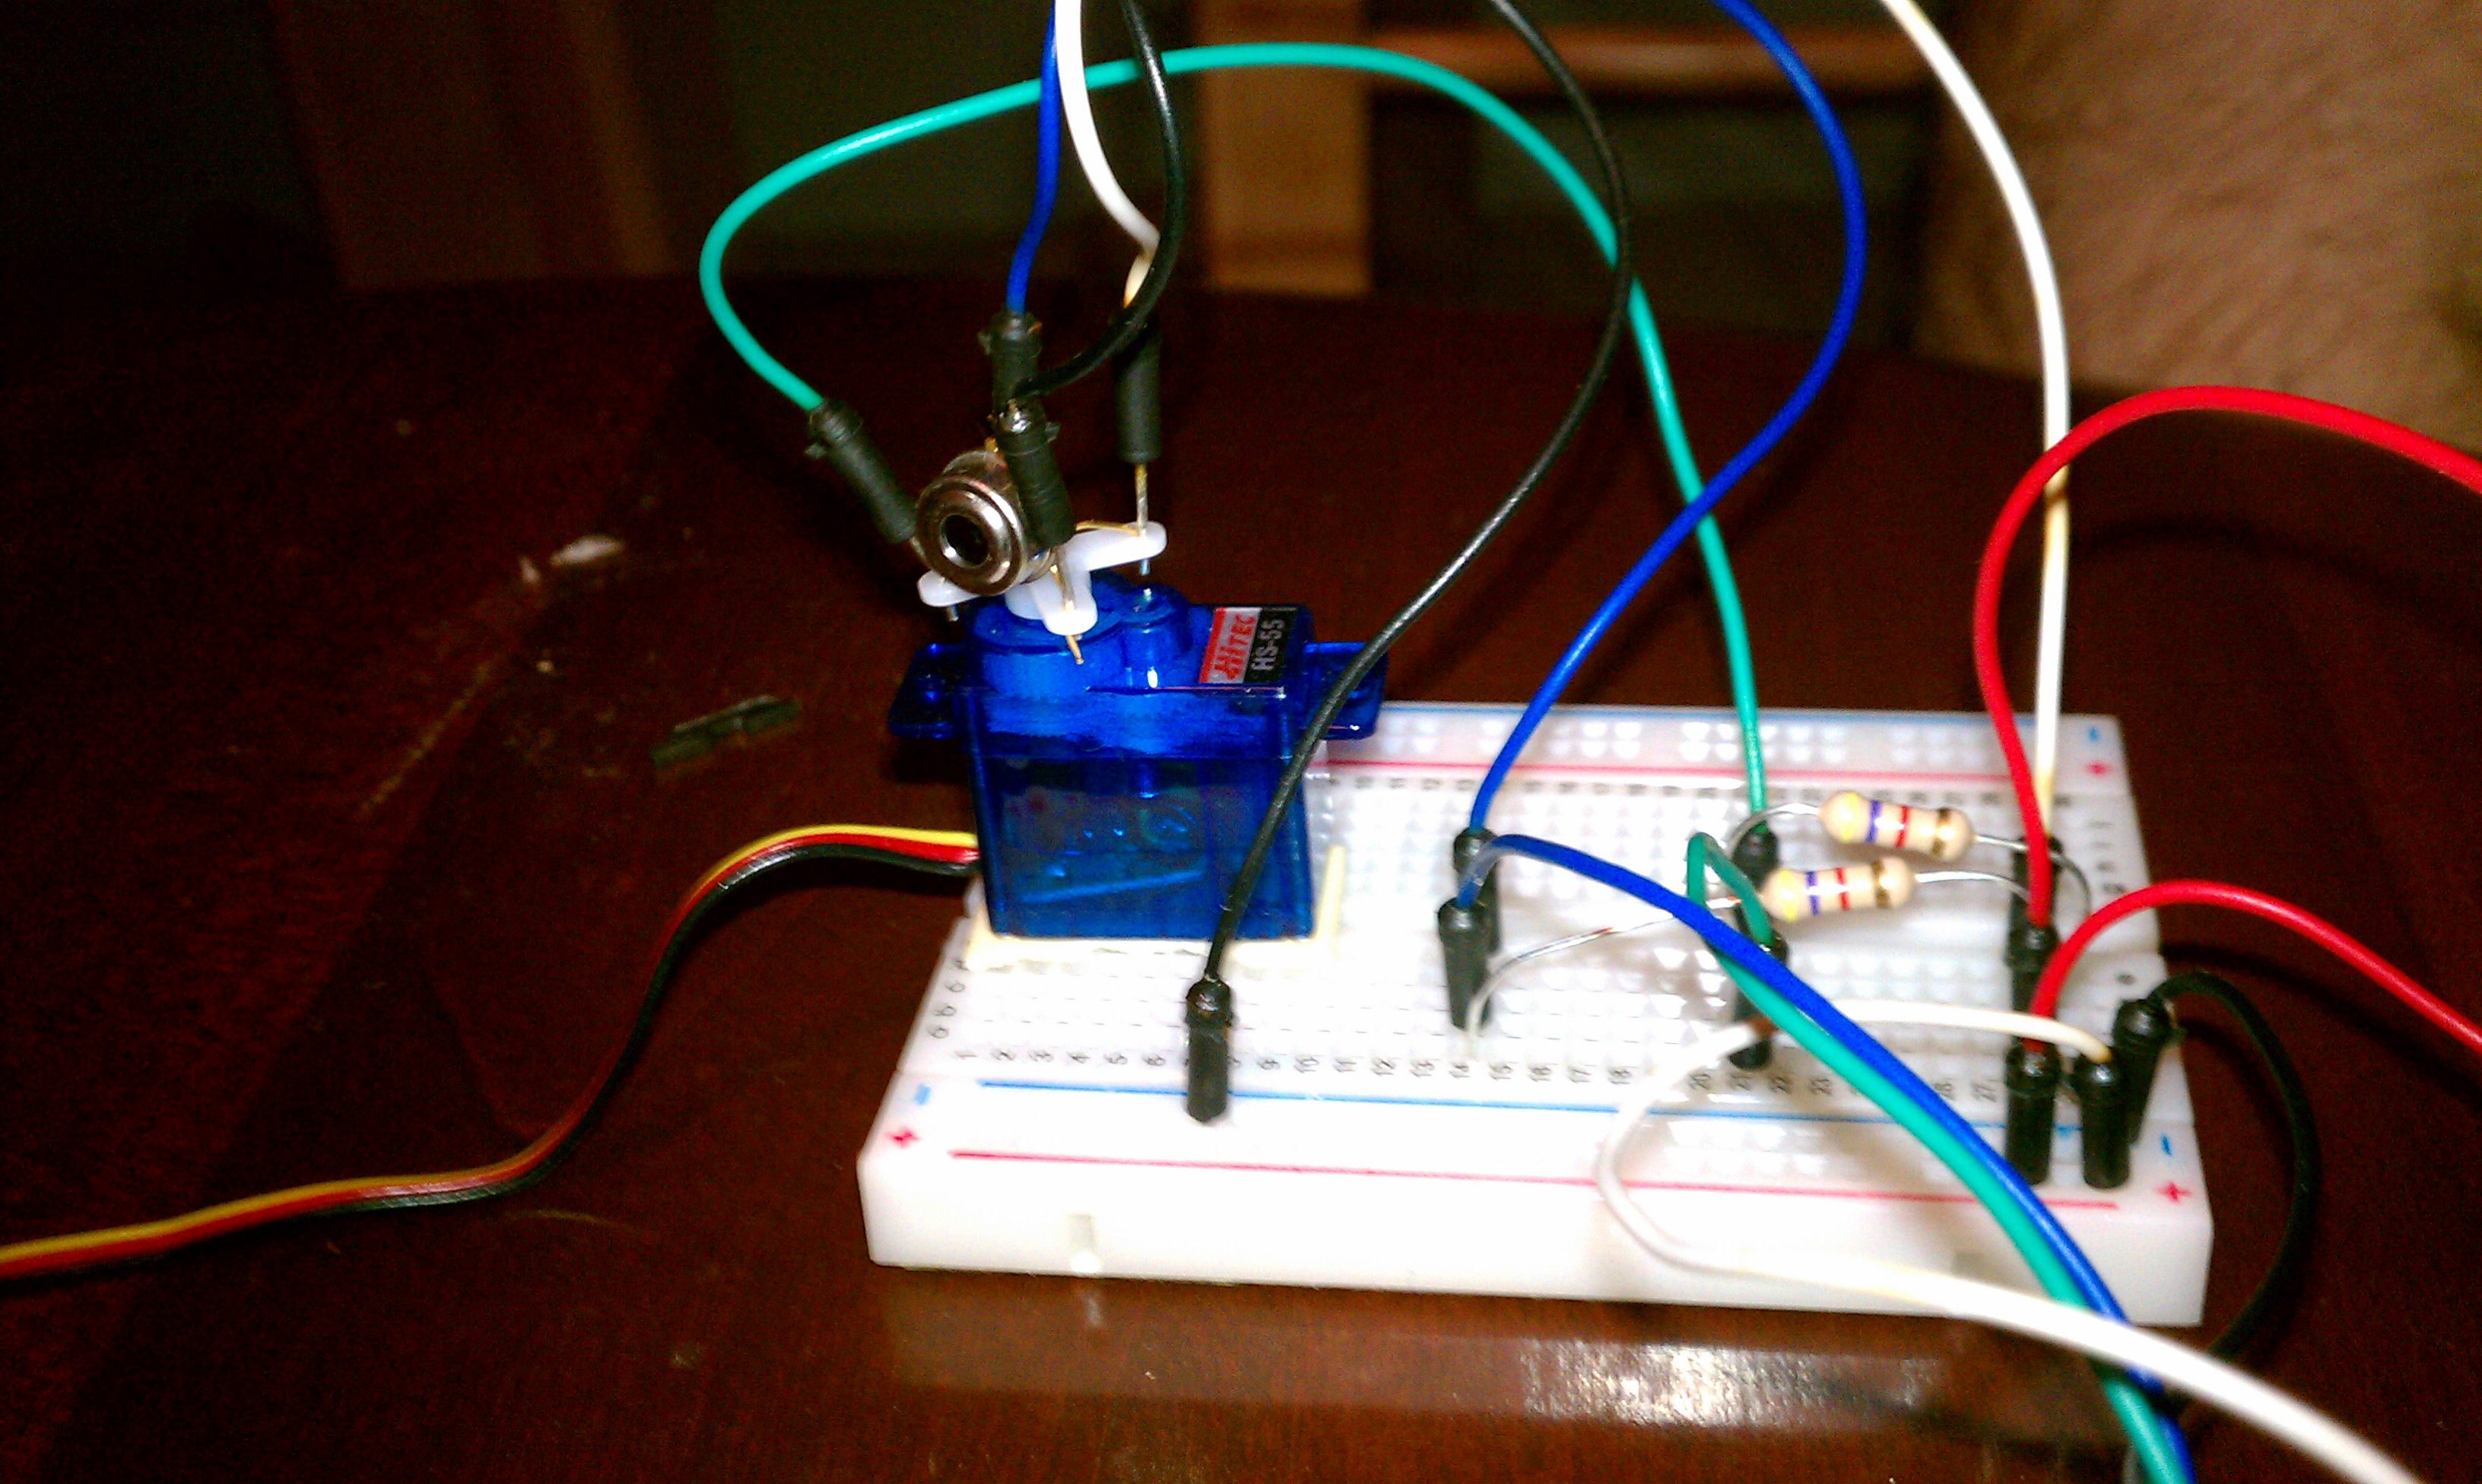 Servo and IR Thermometer Mounted on Breadboard